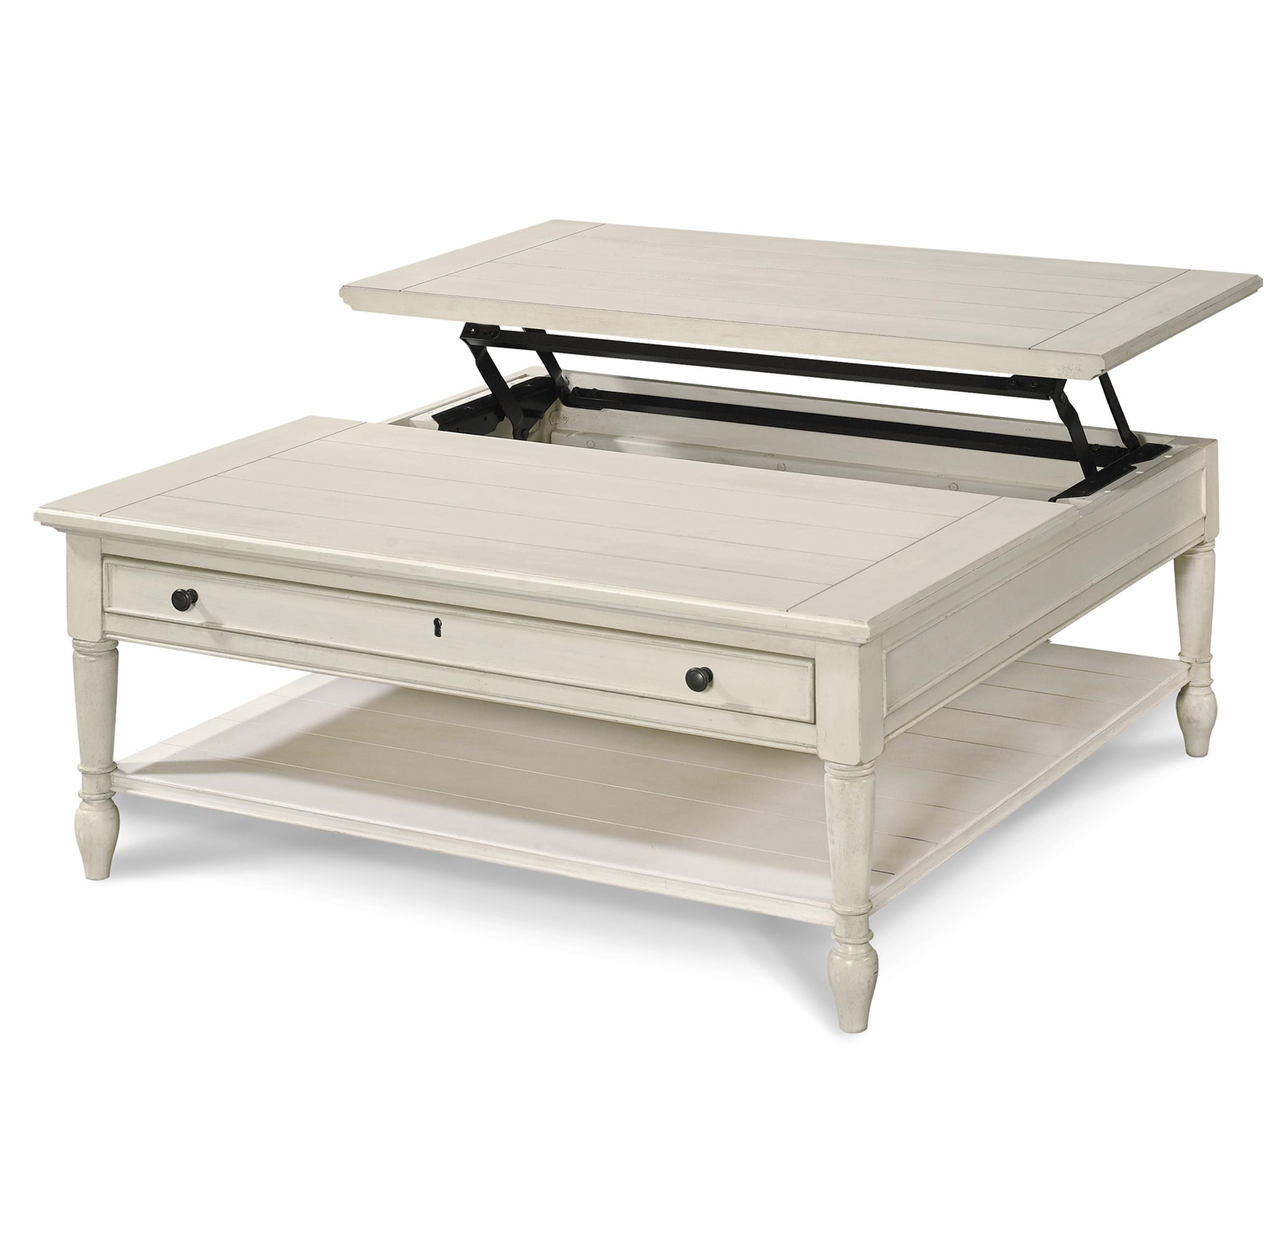 Country-Chic White Wood Square Coffee Table with Lift Top | Zin Home